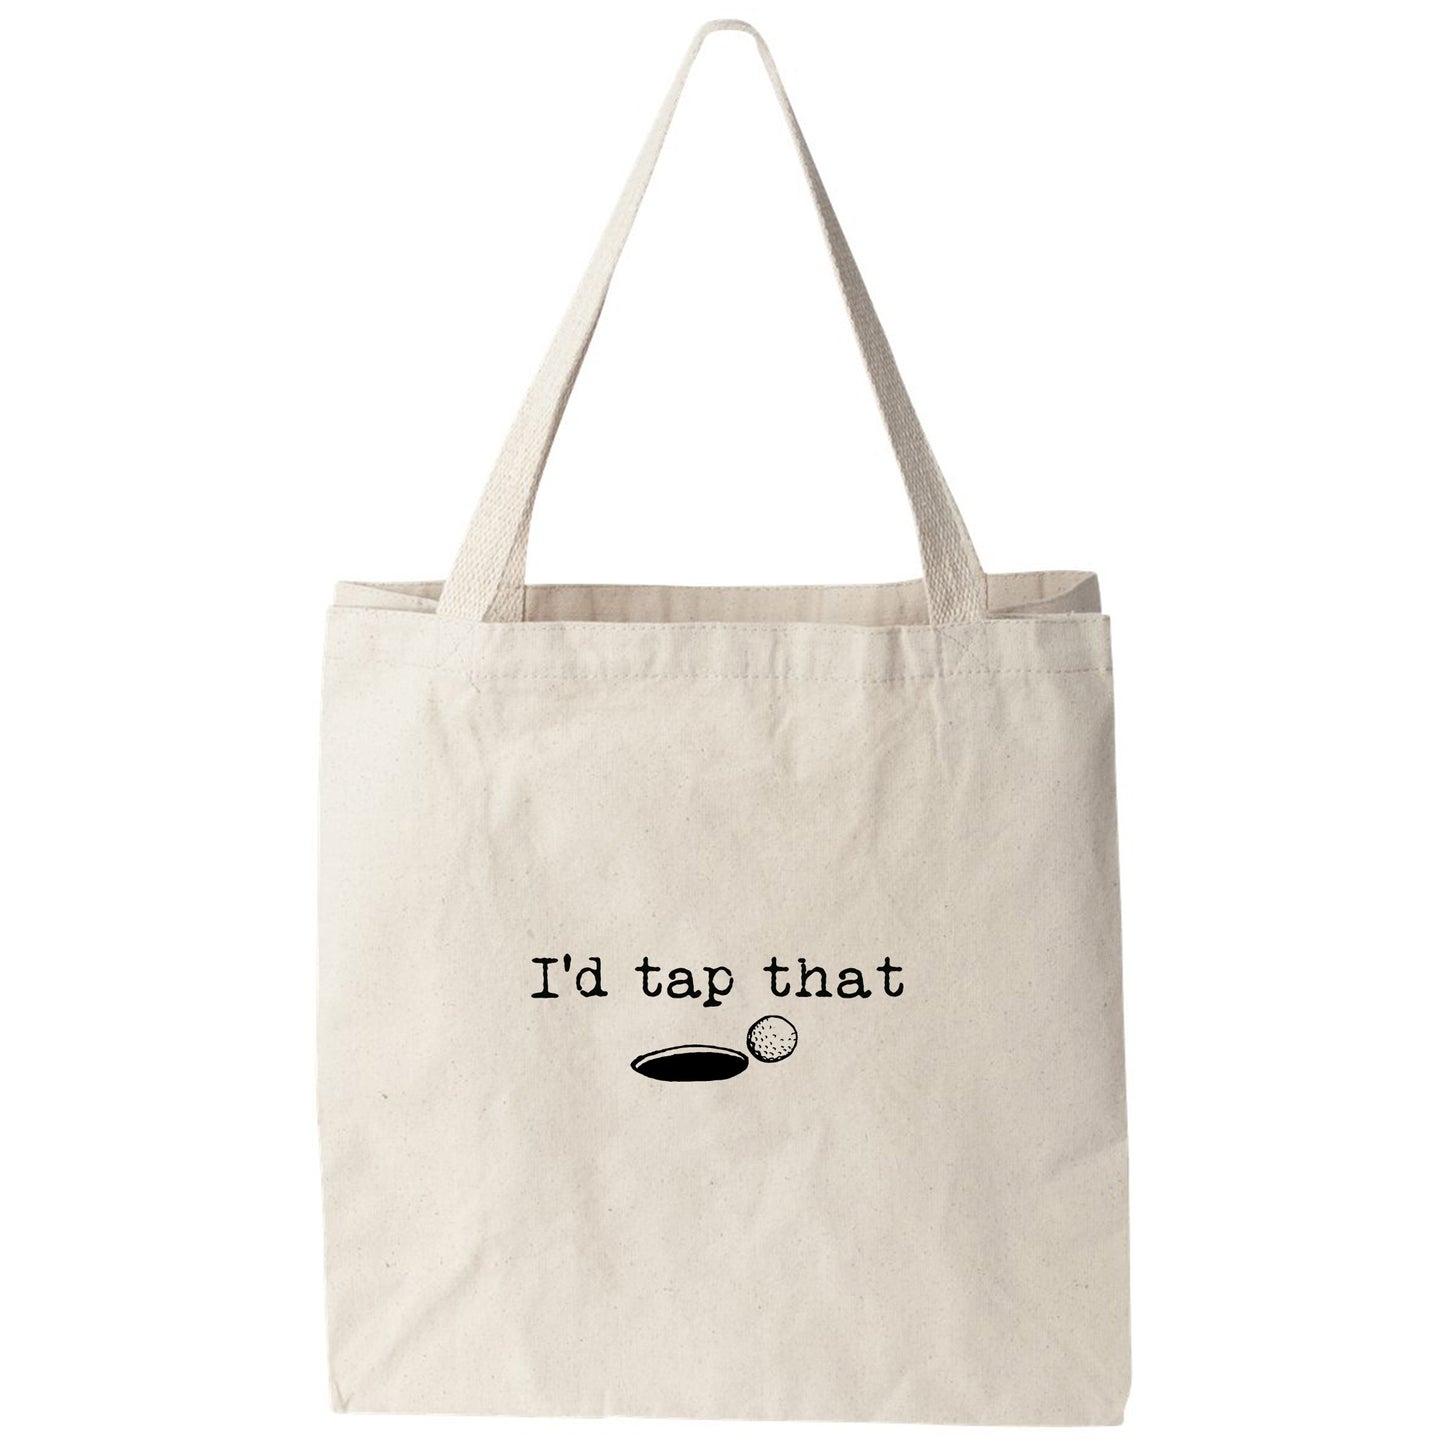 a tote bag that says i'd tap that